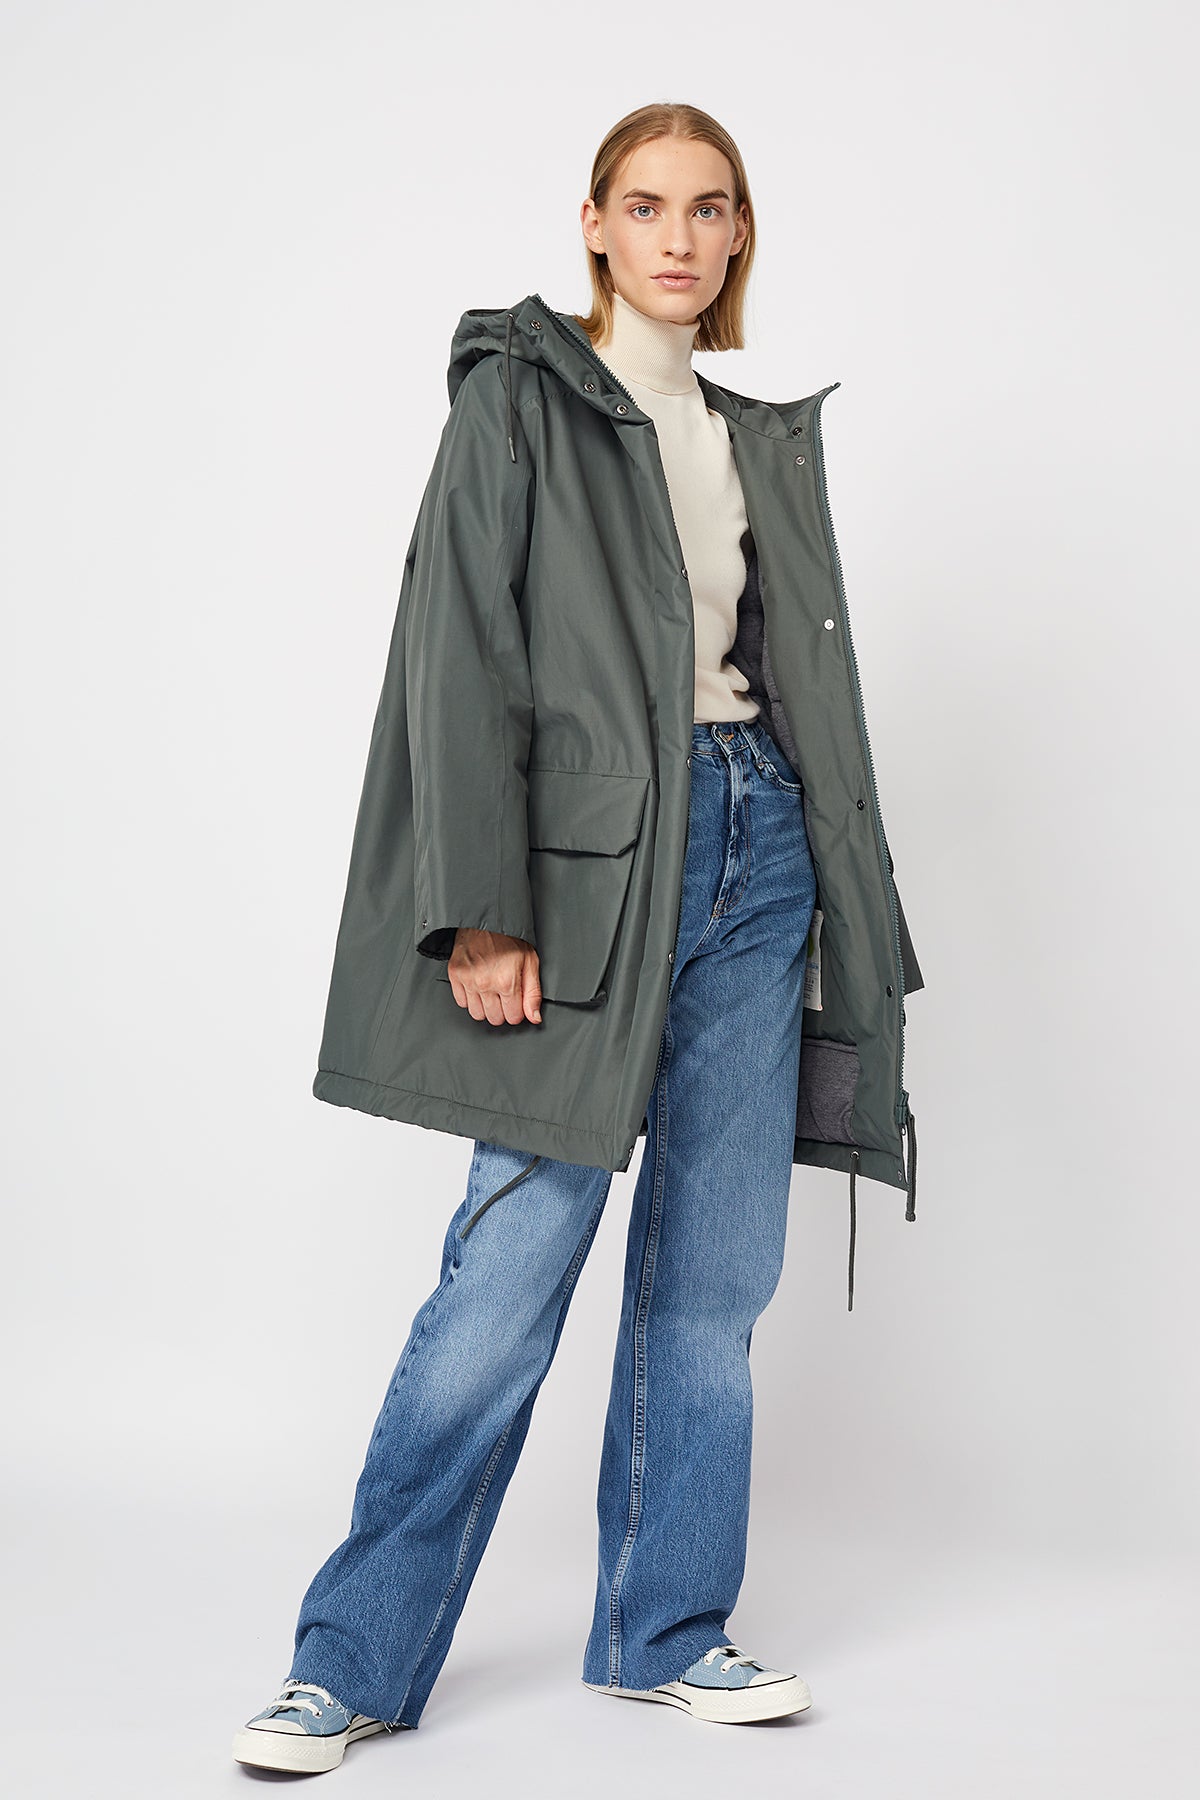 Jacket Parka Kinsey of the fashion label LangerChen in the color Fir, fair  made from sustainable materials | Regenjacken